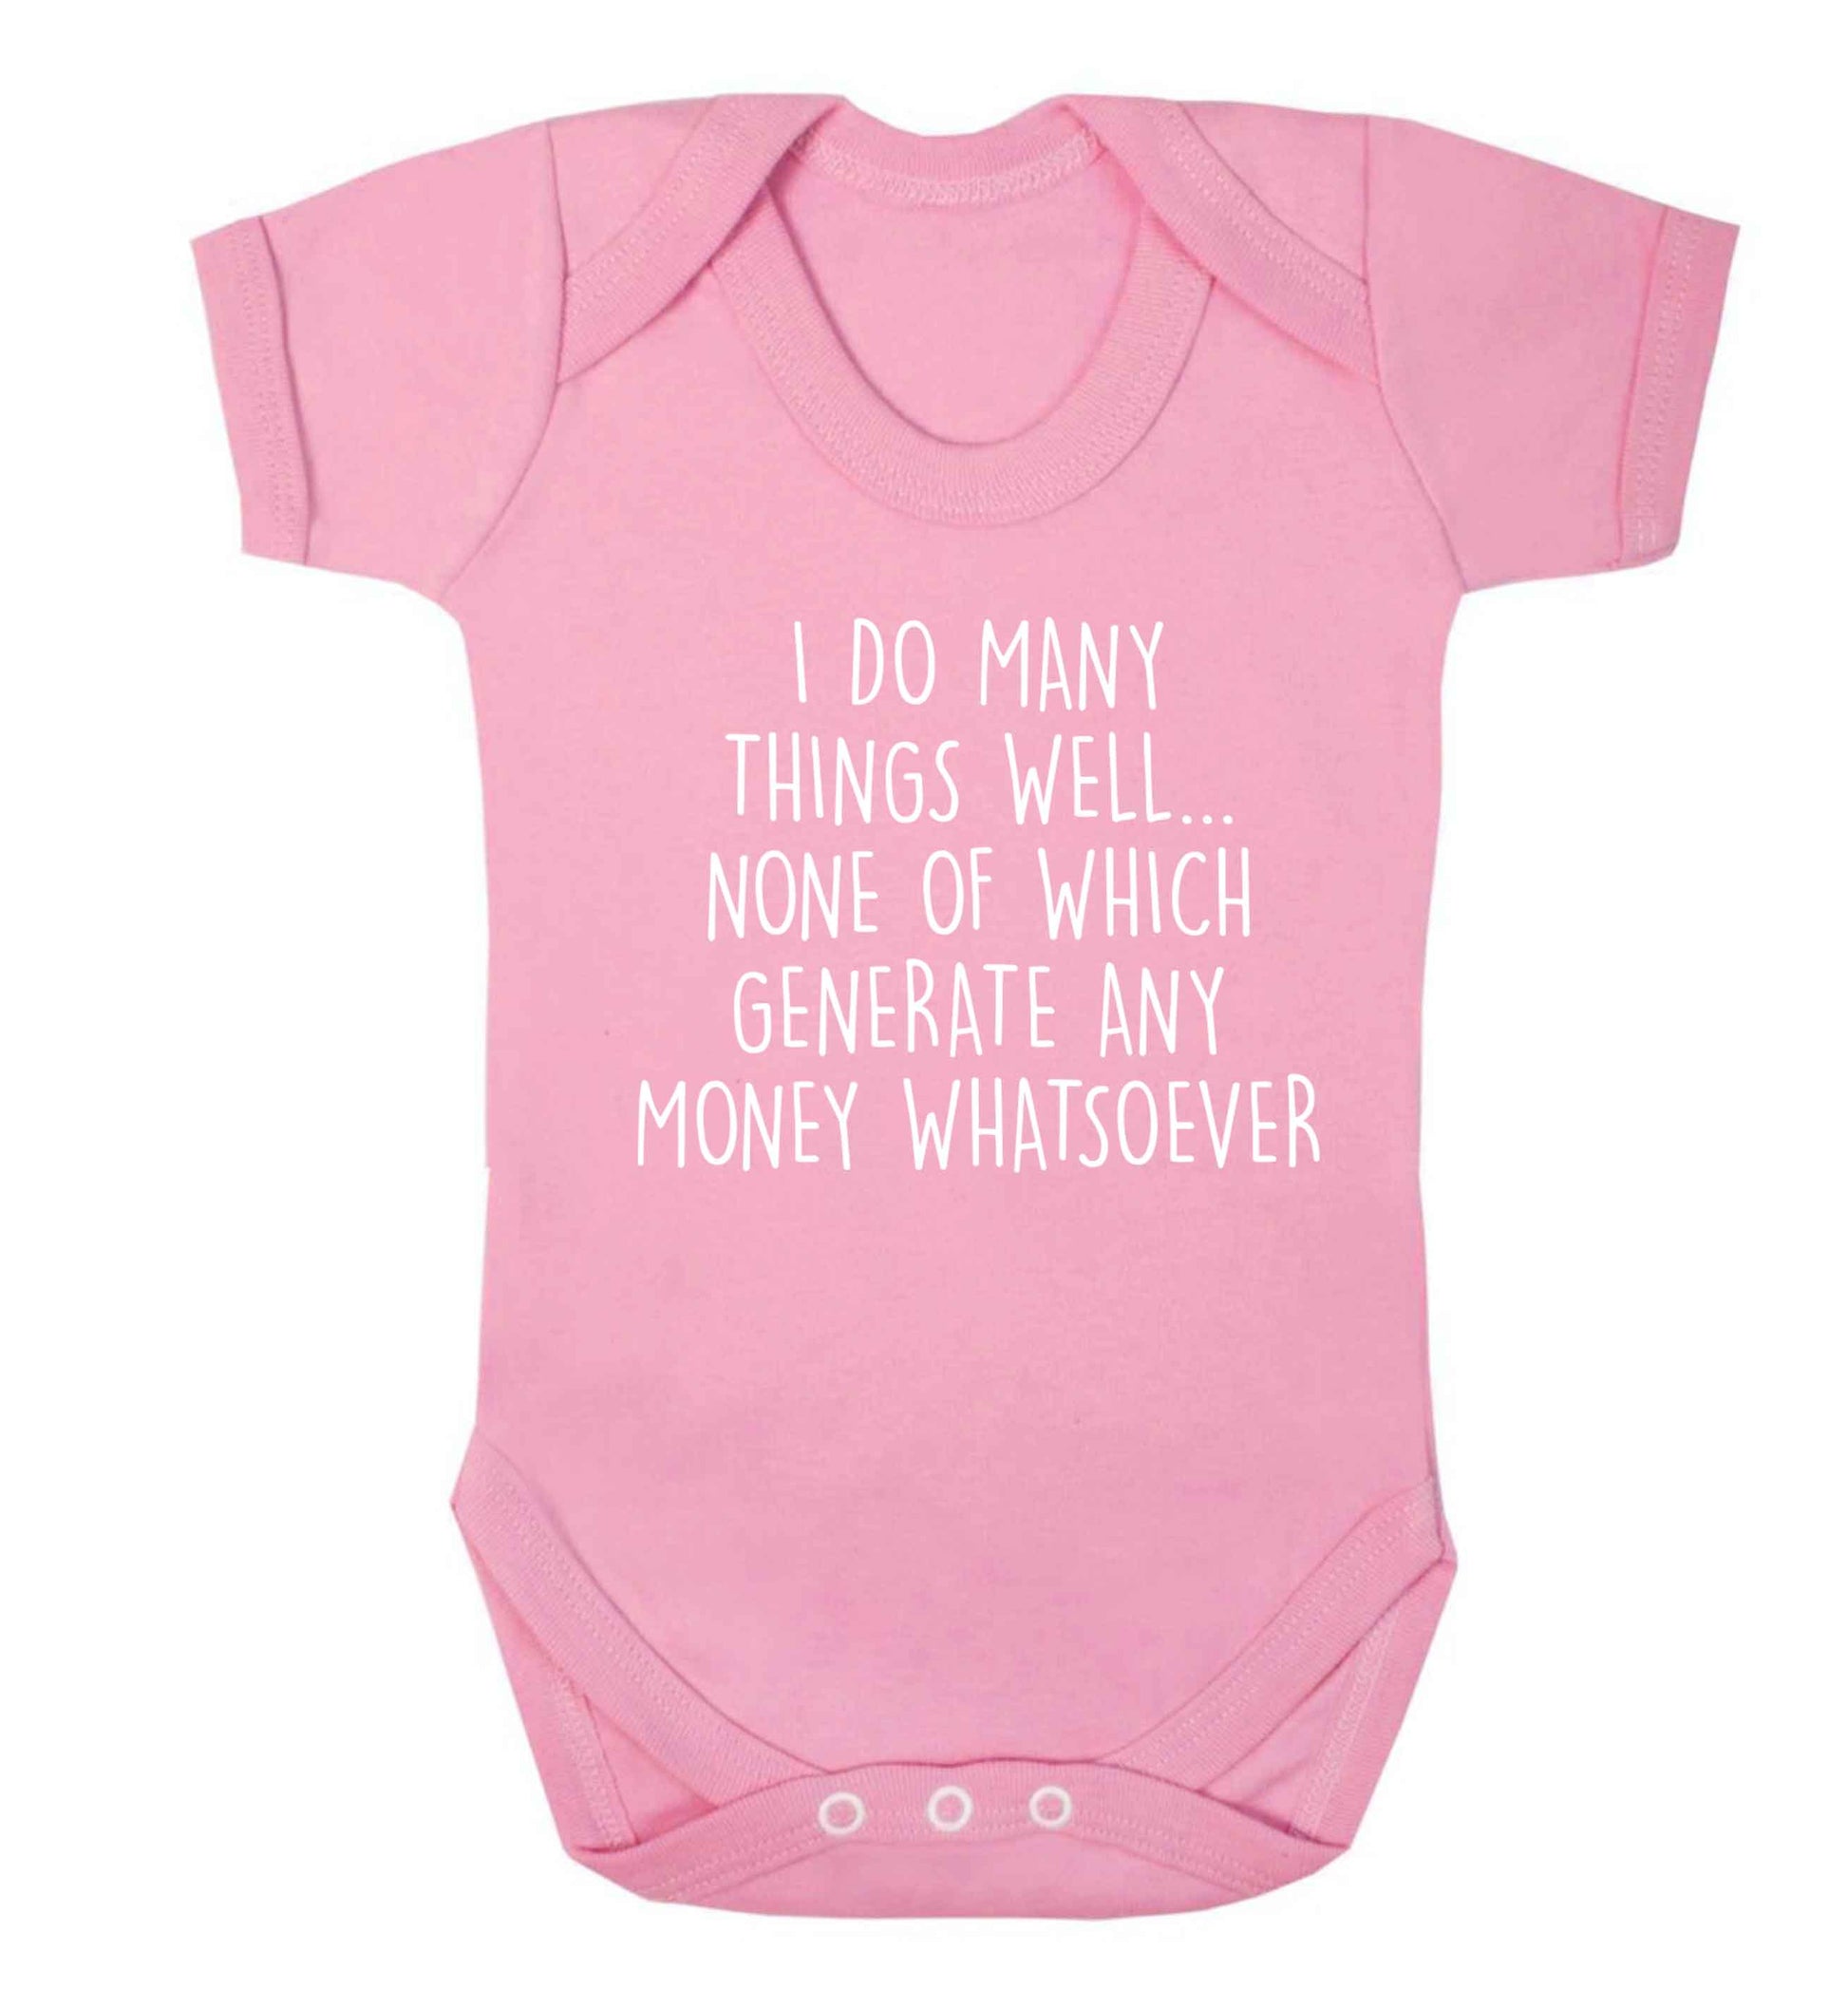 I do many things well none of which generate income Baby Vest pale pink 18-24 months